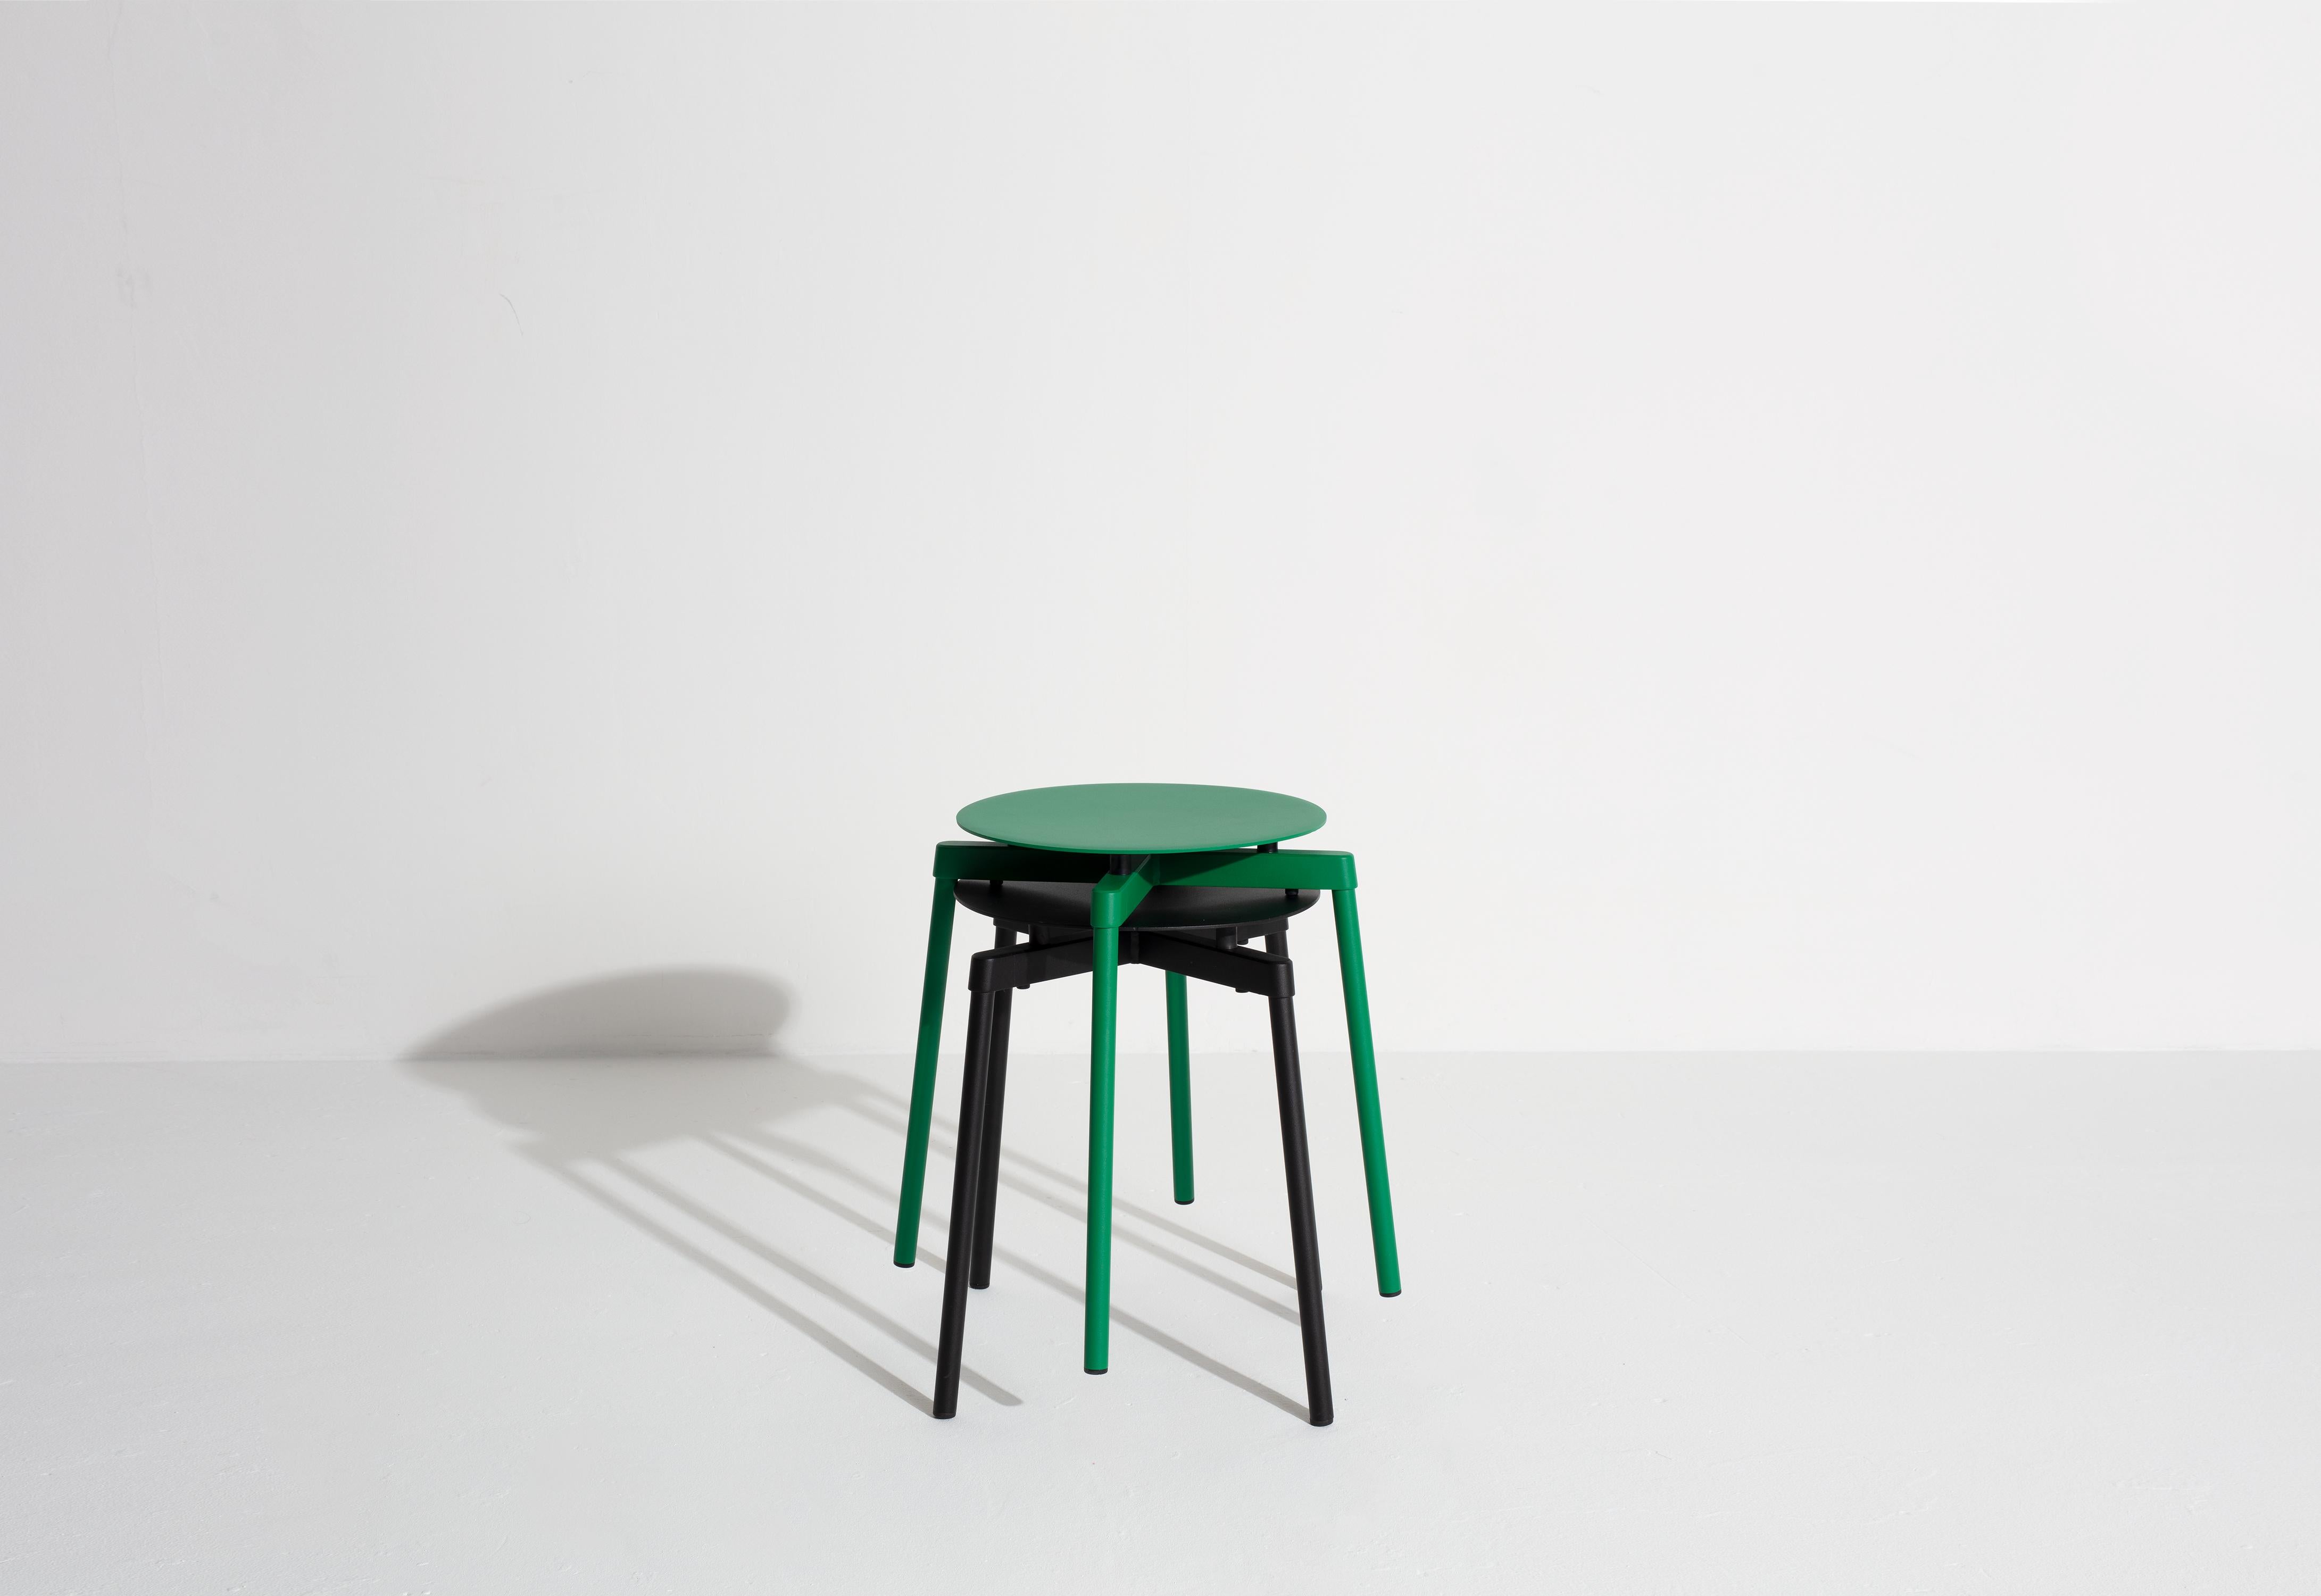 Petite Friture Fromme Stool in Mint-Green Aluminium by Tom Chung, 2020 For Sale 2